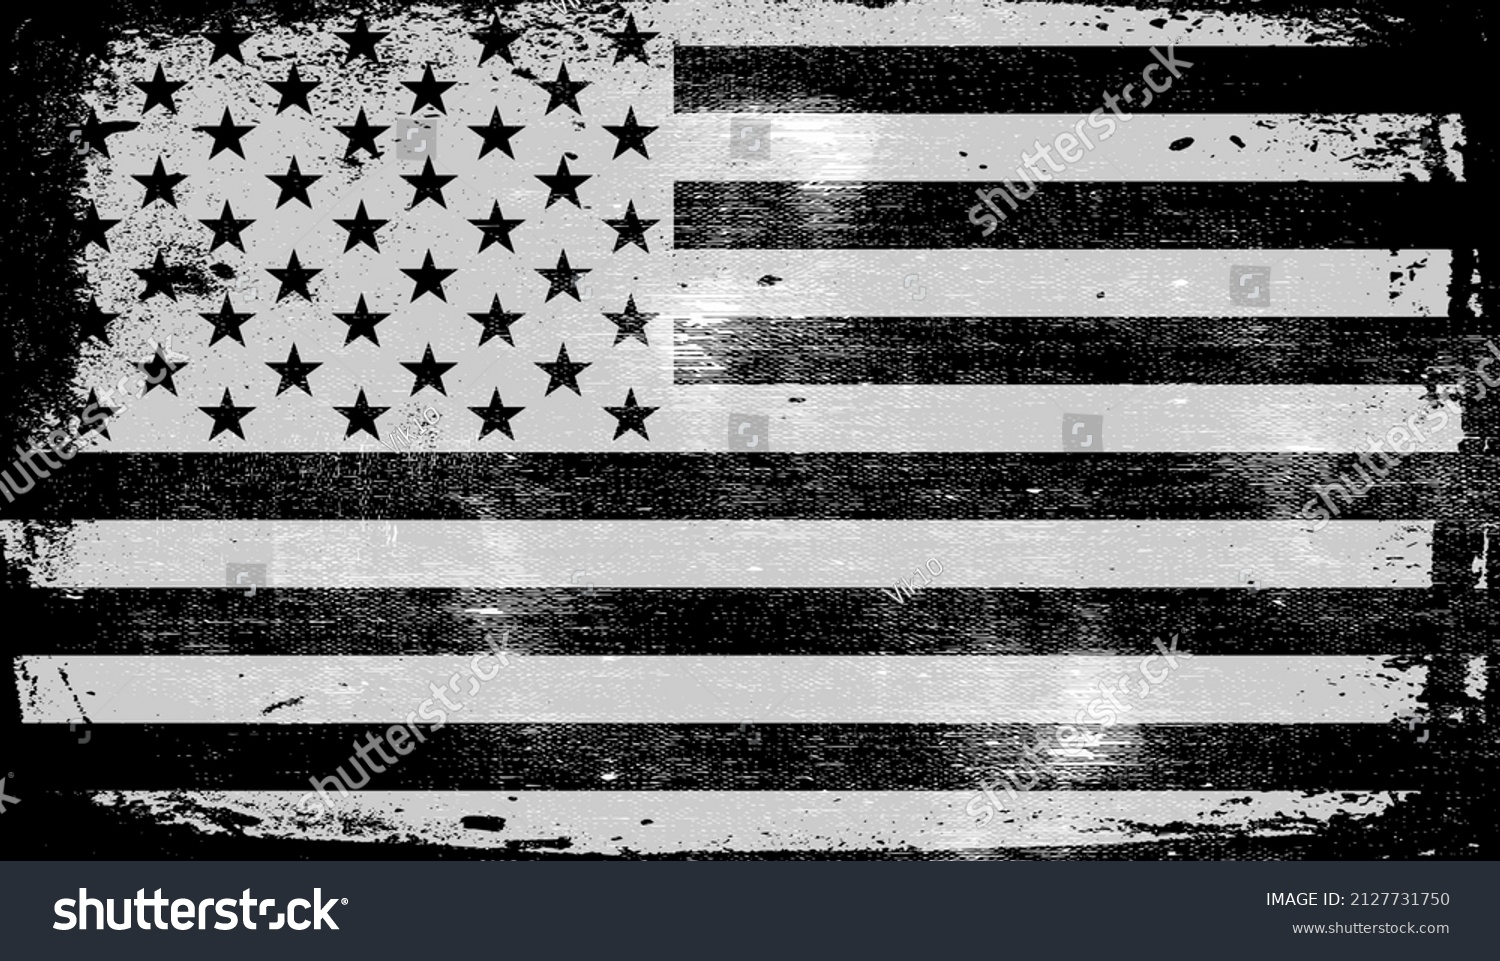 SVG of American Flag Background. Grunge Aged Vector Template. Horizontal orientation. Monochrome gamut. Black and white. Grunge layers can be easy editable or removed. svg